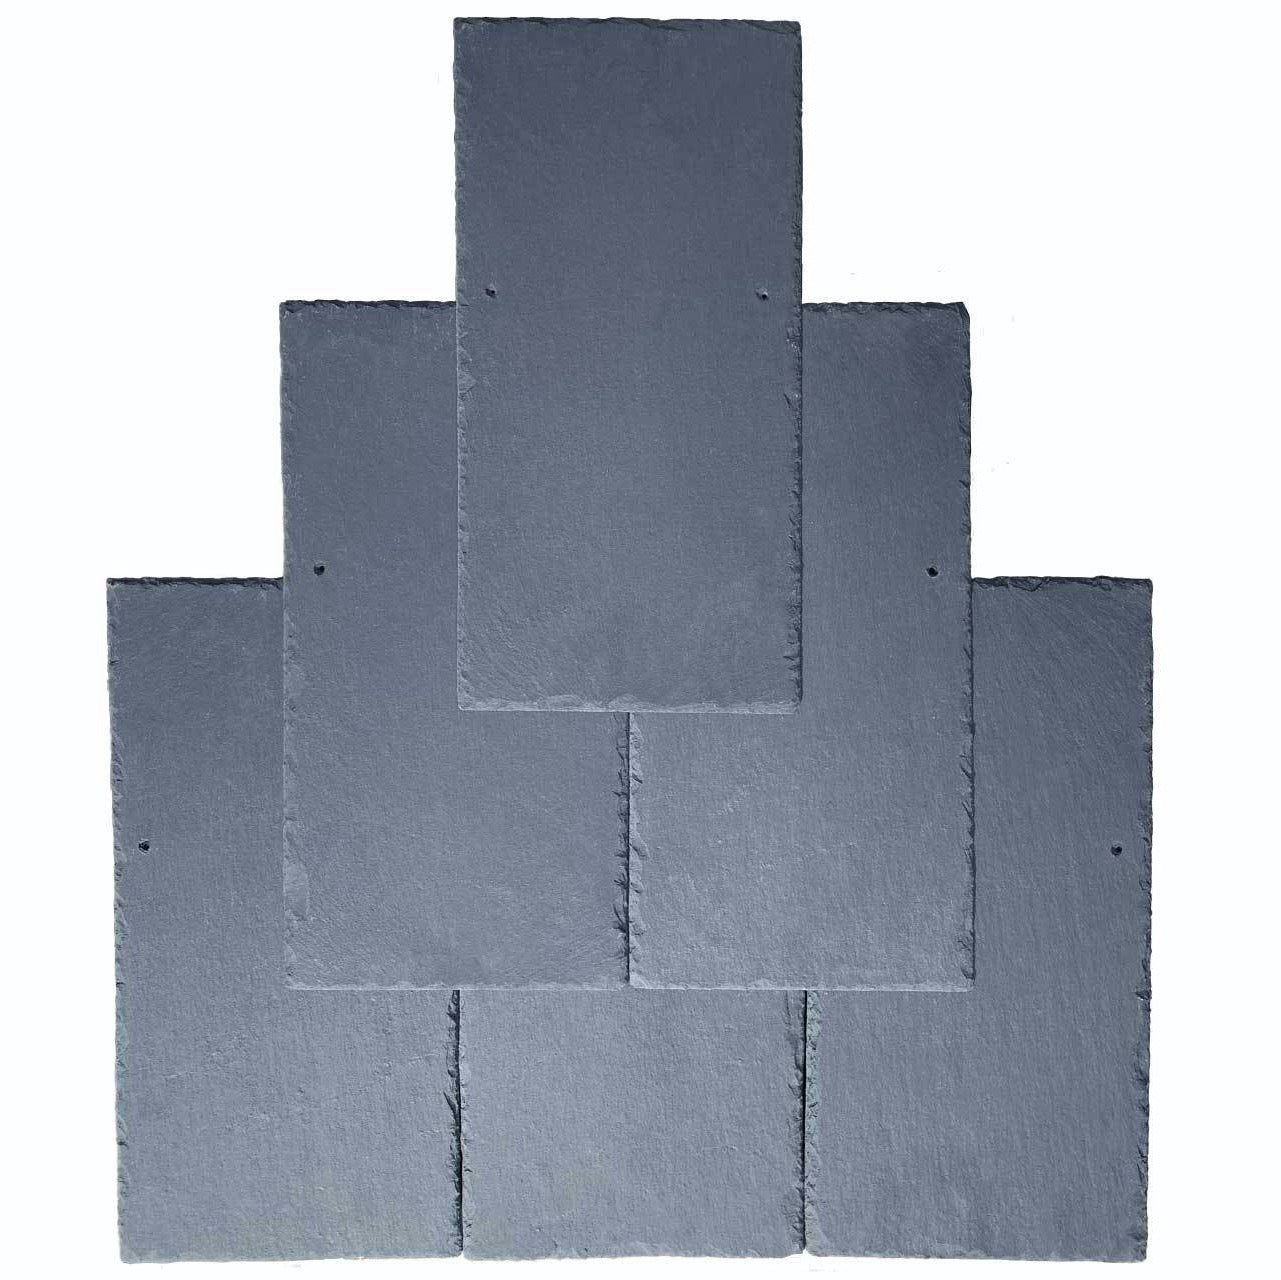 Six Madog Grey roofing slates, with pre drilled holes